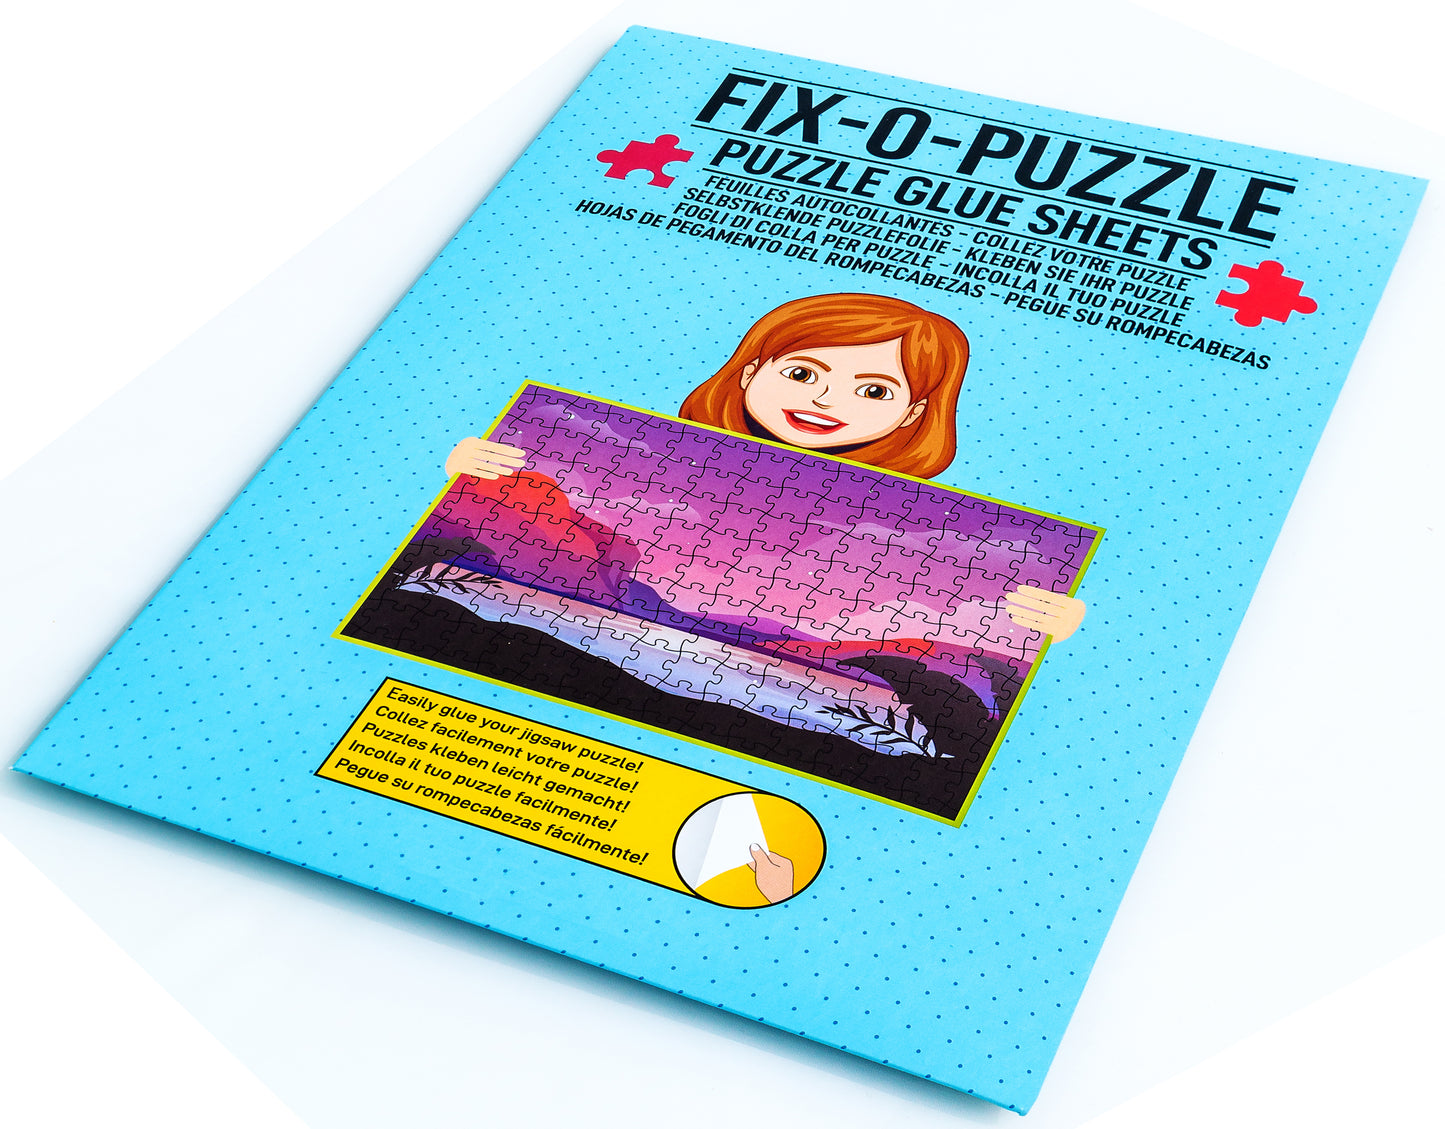 Free puzzle sheets